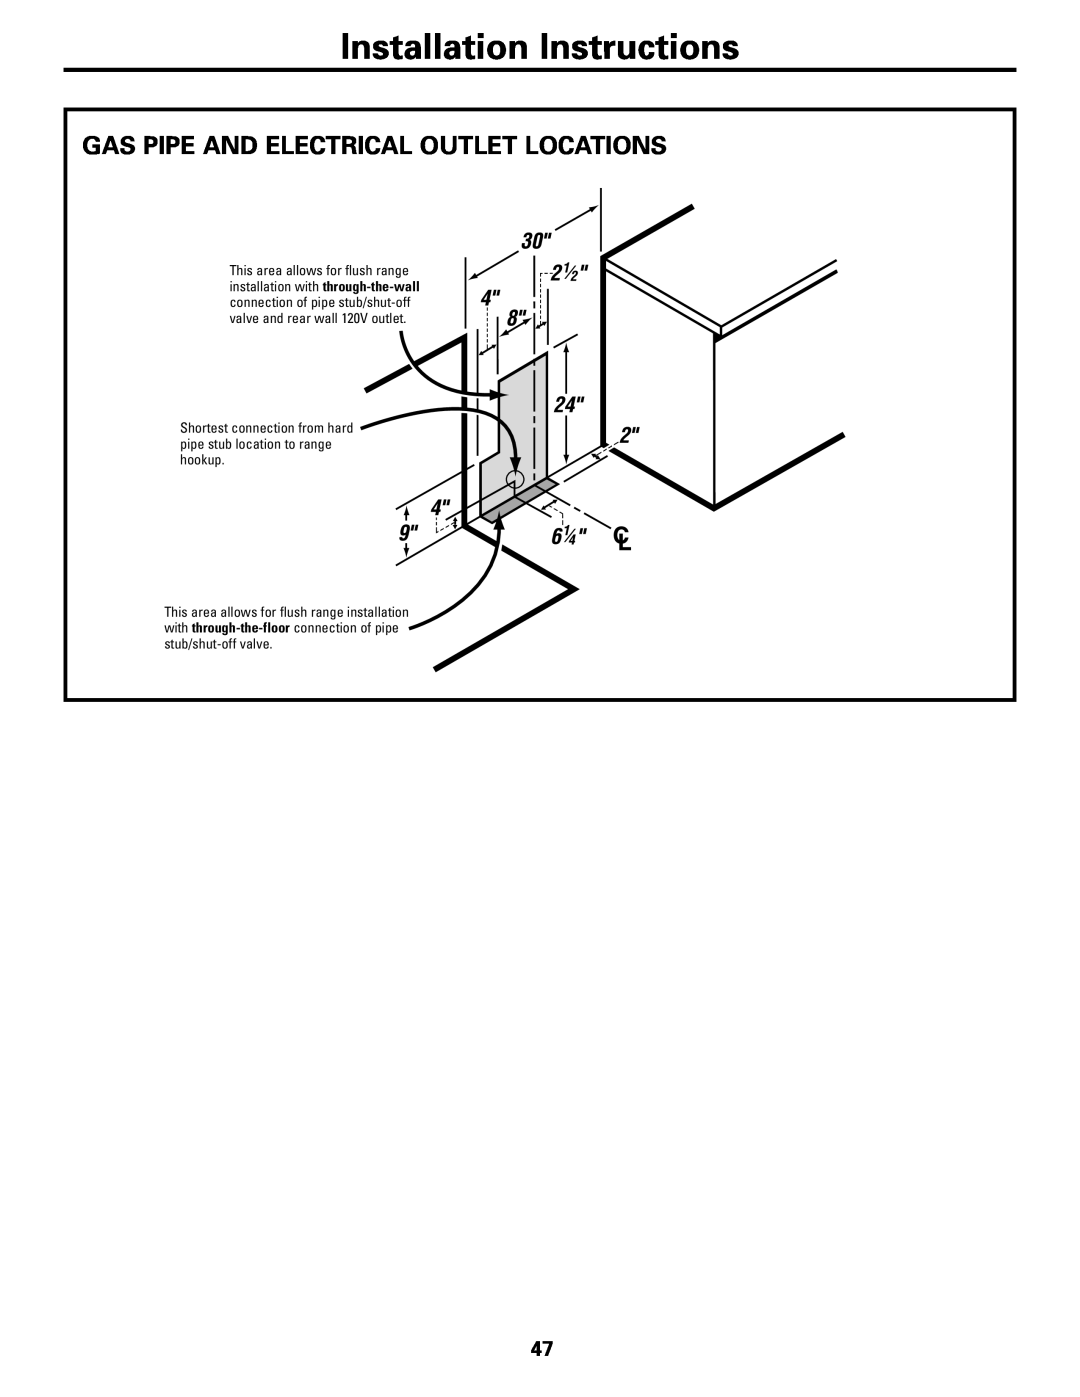 GE JGB918, JGBP88 manual Gas Pipe And Electrical Outlet Locations, Installation Instructions 